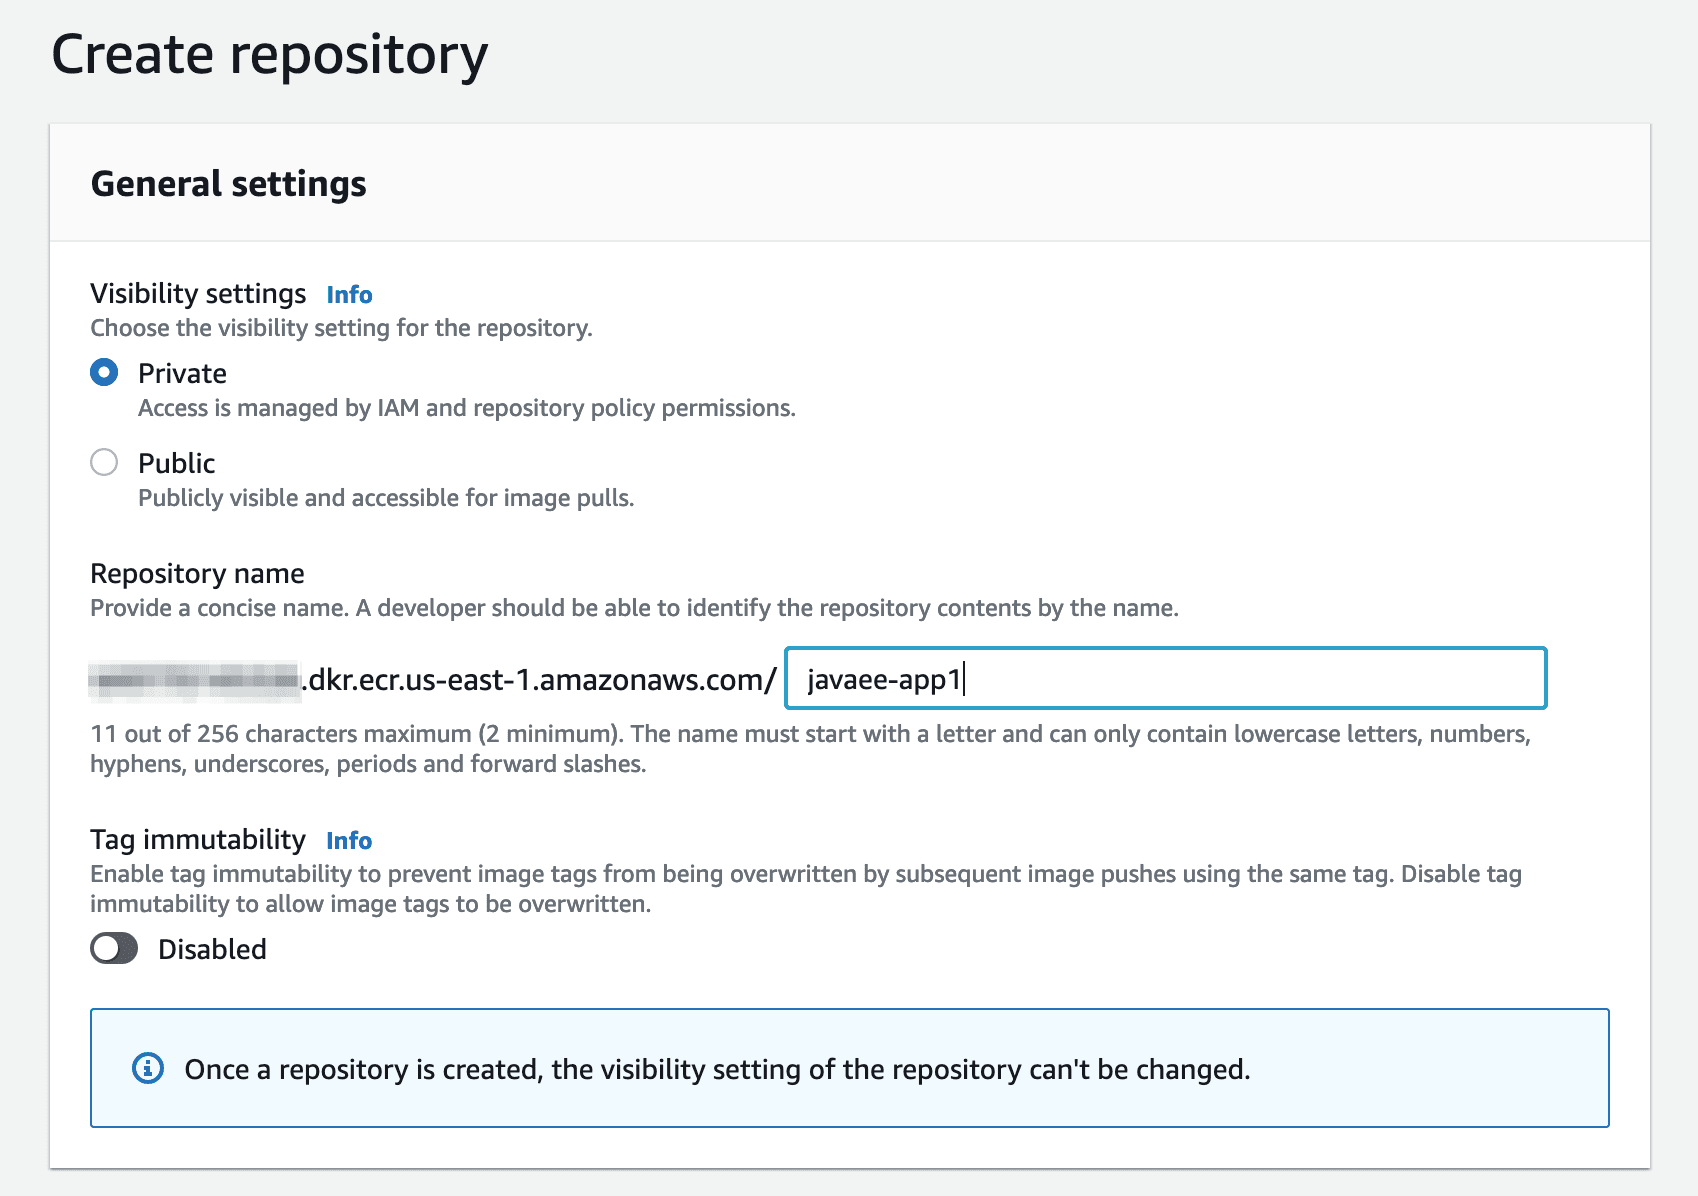 Instructions for naming the repository